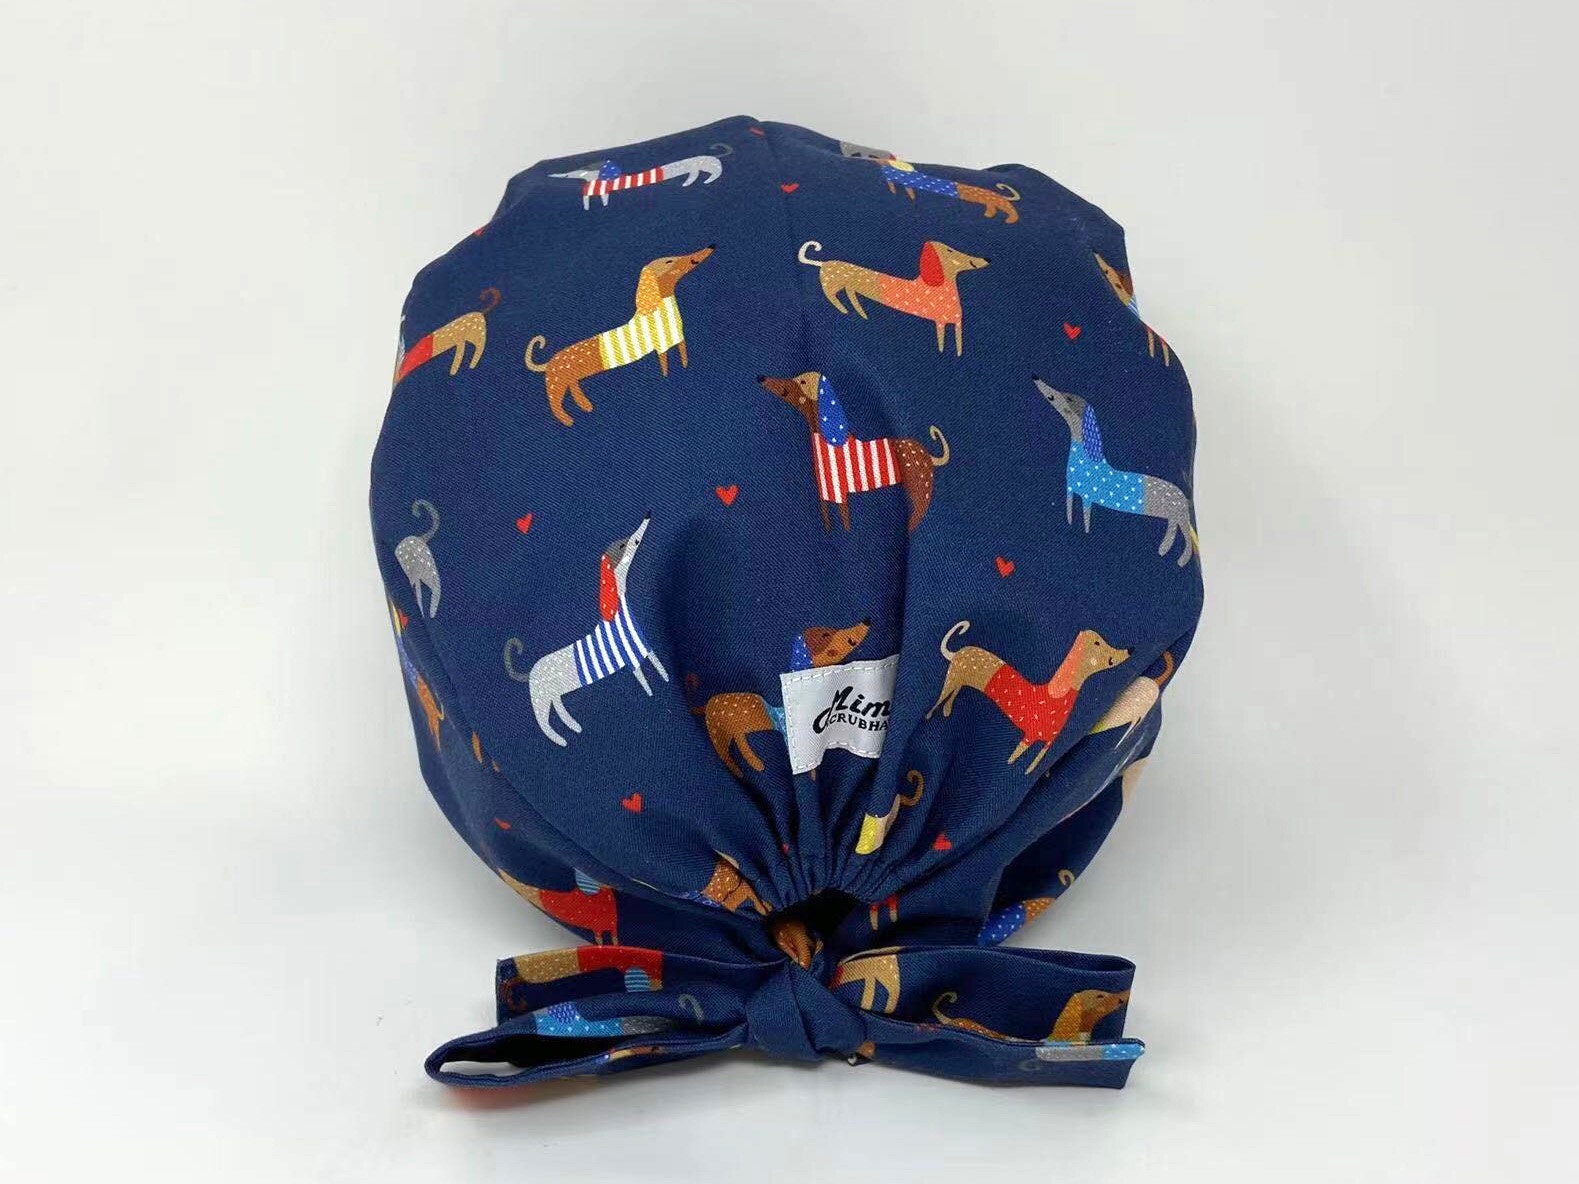 Colorful Dachshund on Navy